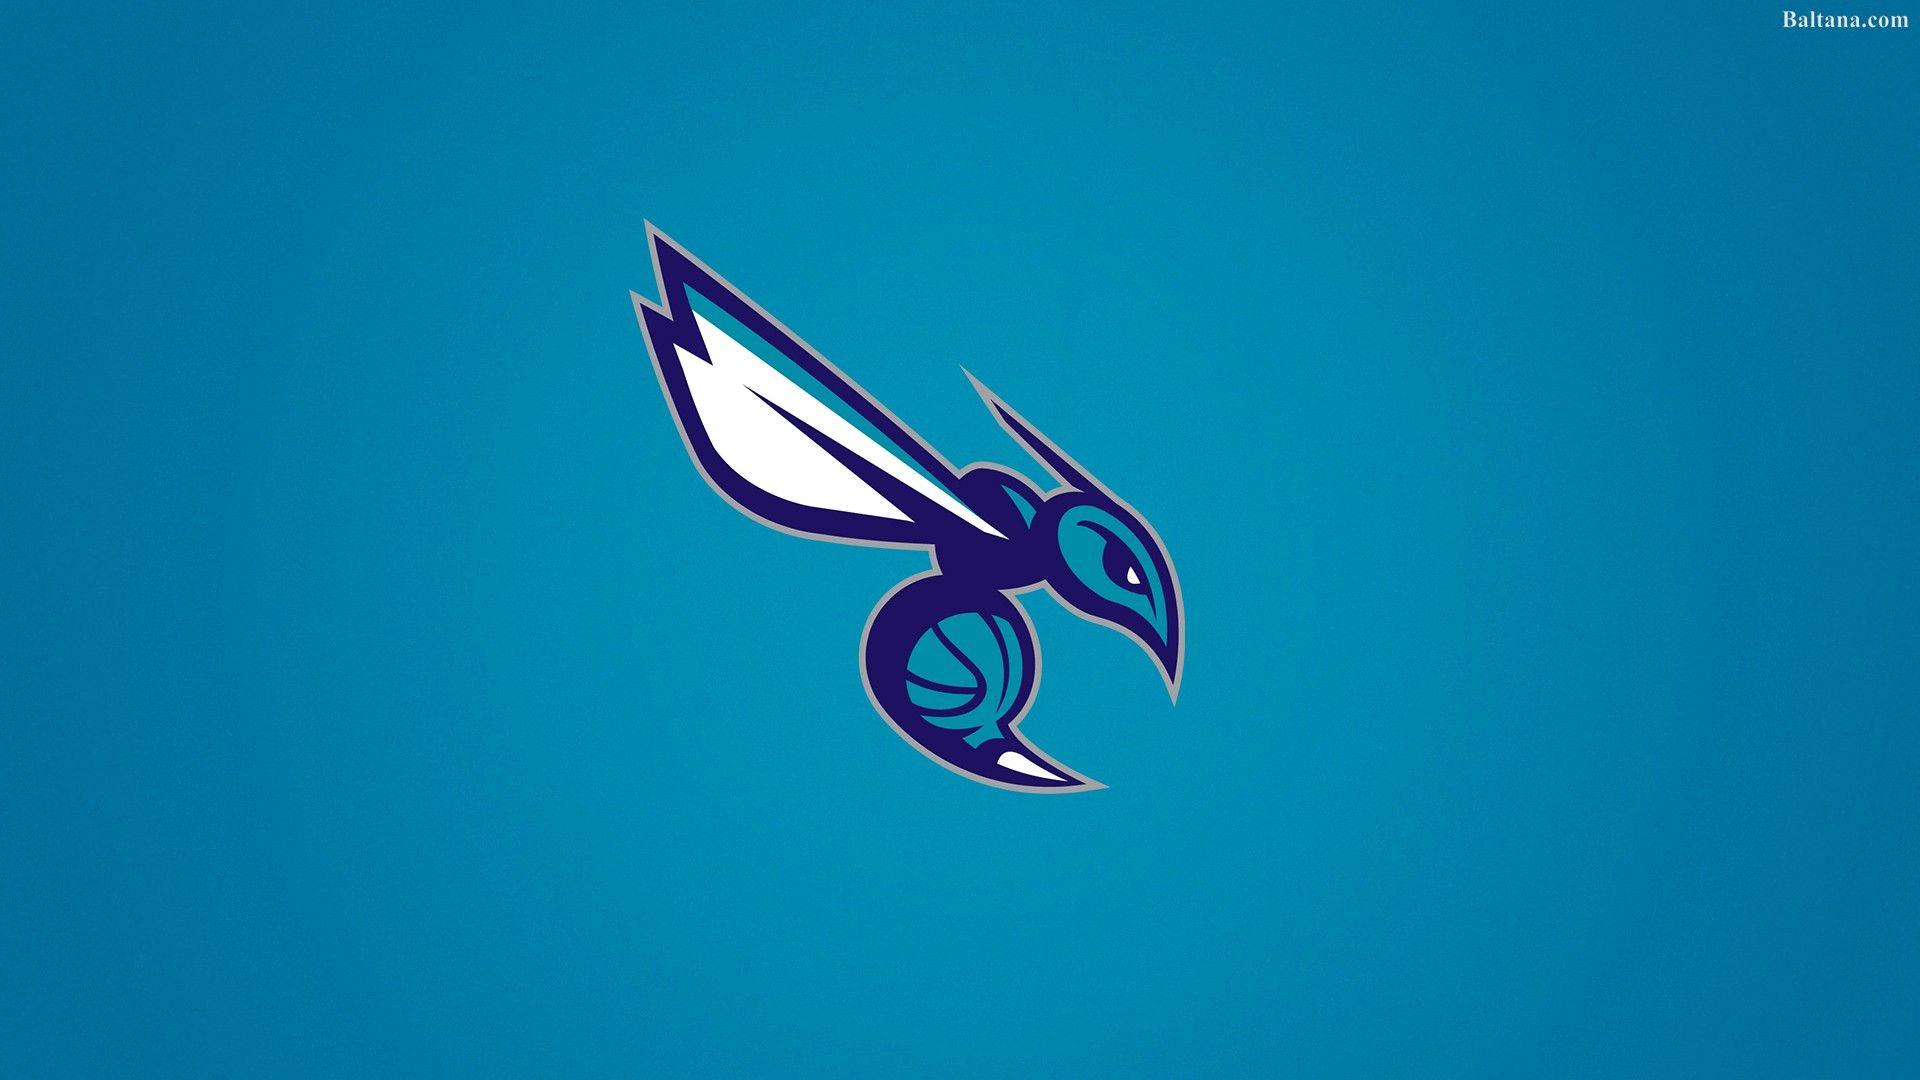 Charlotte Hornets Wallpapers Top Free Charlotte Hornets Backgrounds Wallpaperaccess